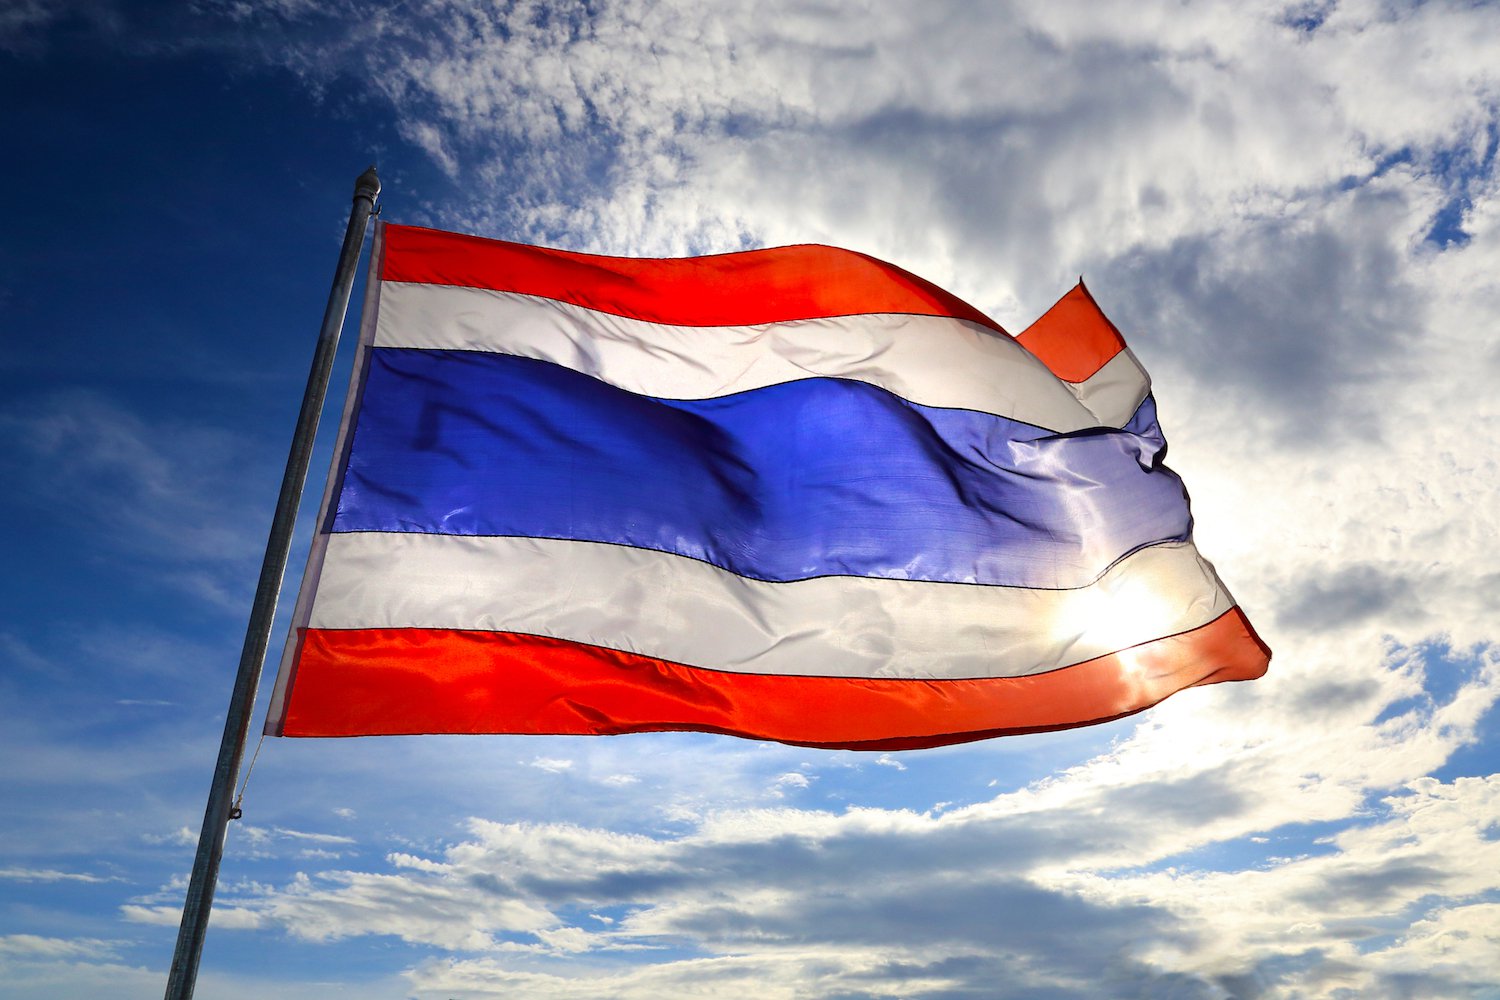 20 Thai Crypto Exchanges Have Applied For New Digital Assets Licenses